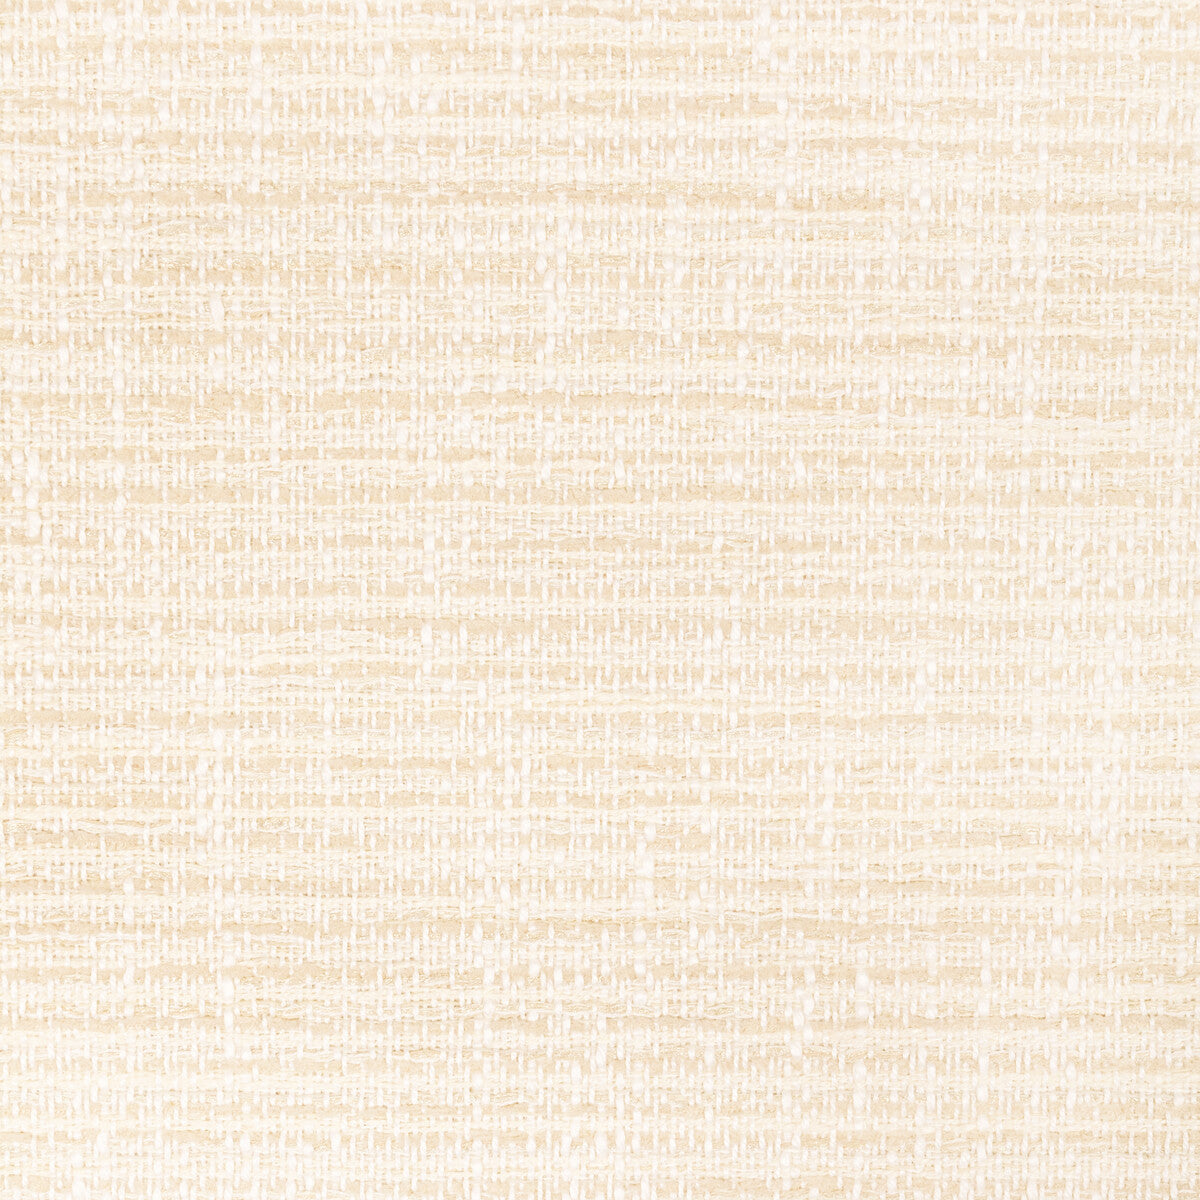 Kravet Design fabric in 36406-161 color - pattern 36406.161.0 - by Kravet Design in the Performance Crypton Home collection